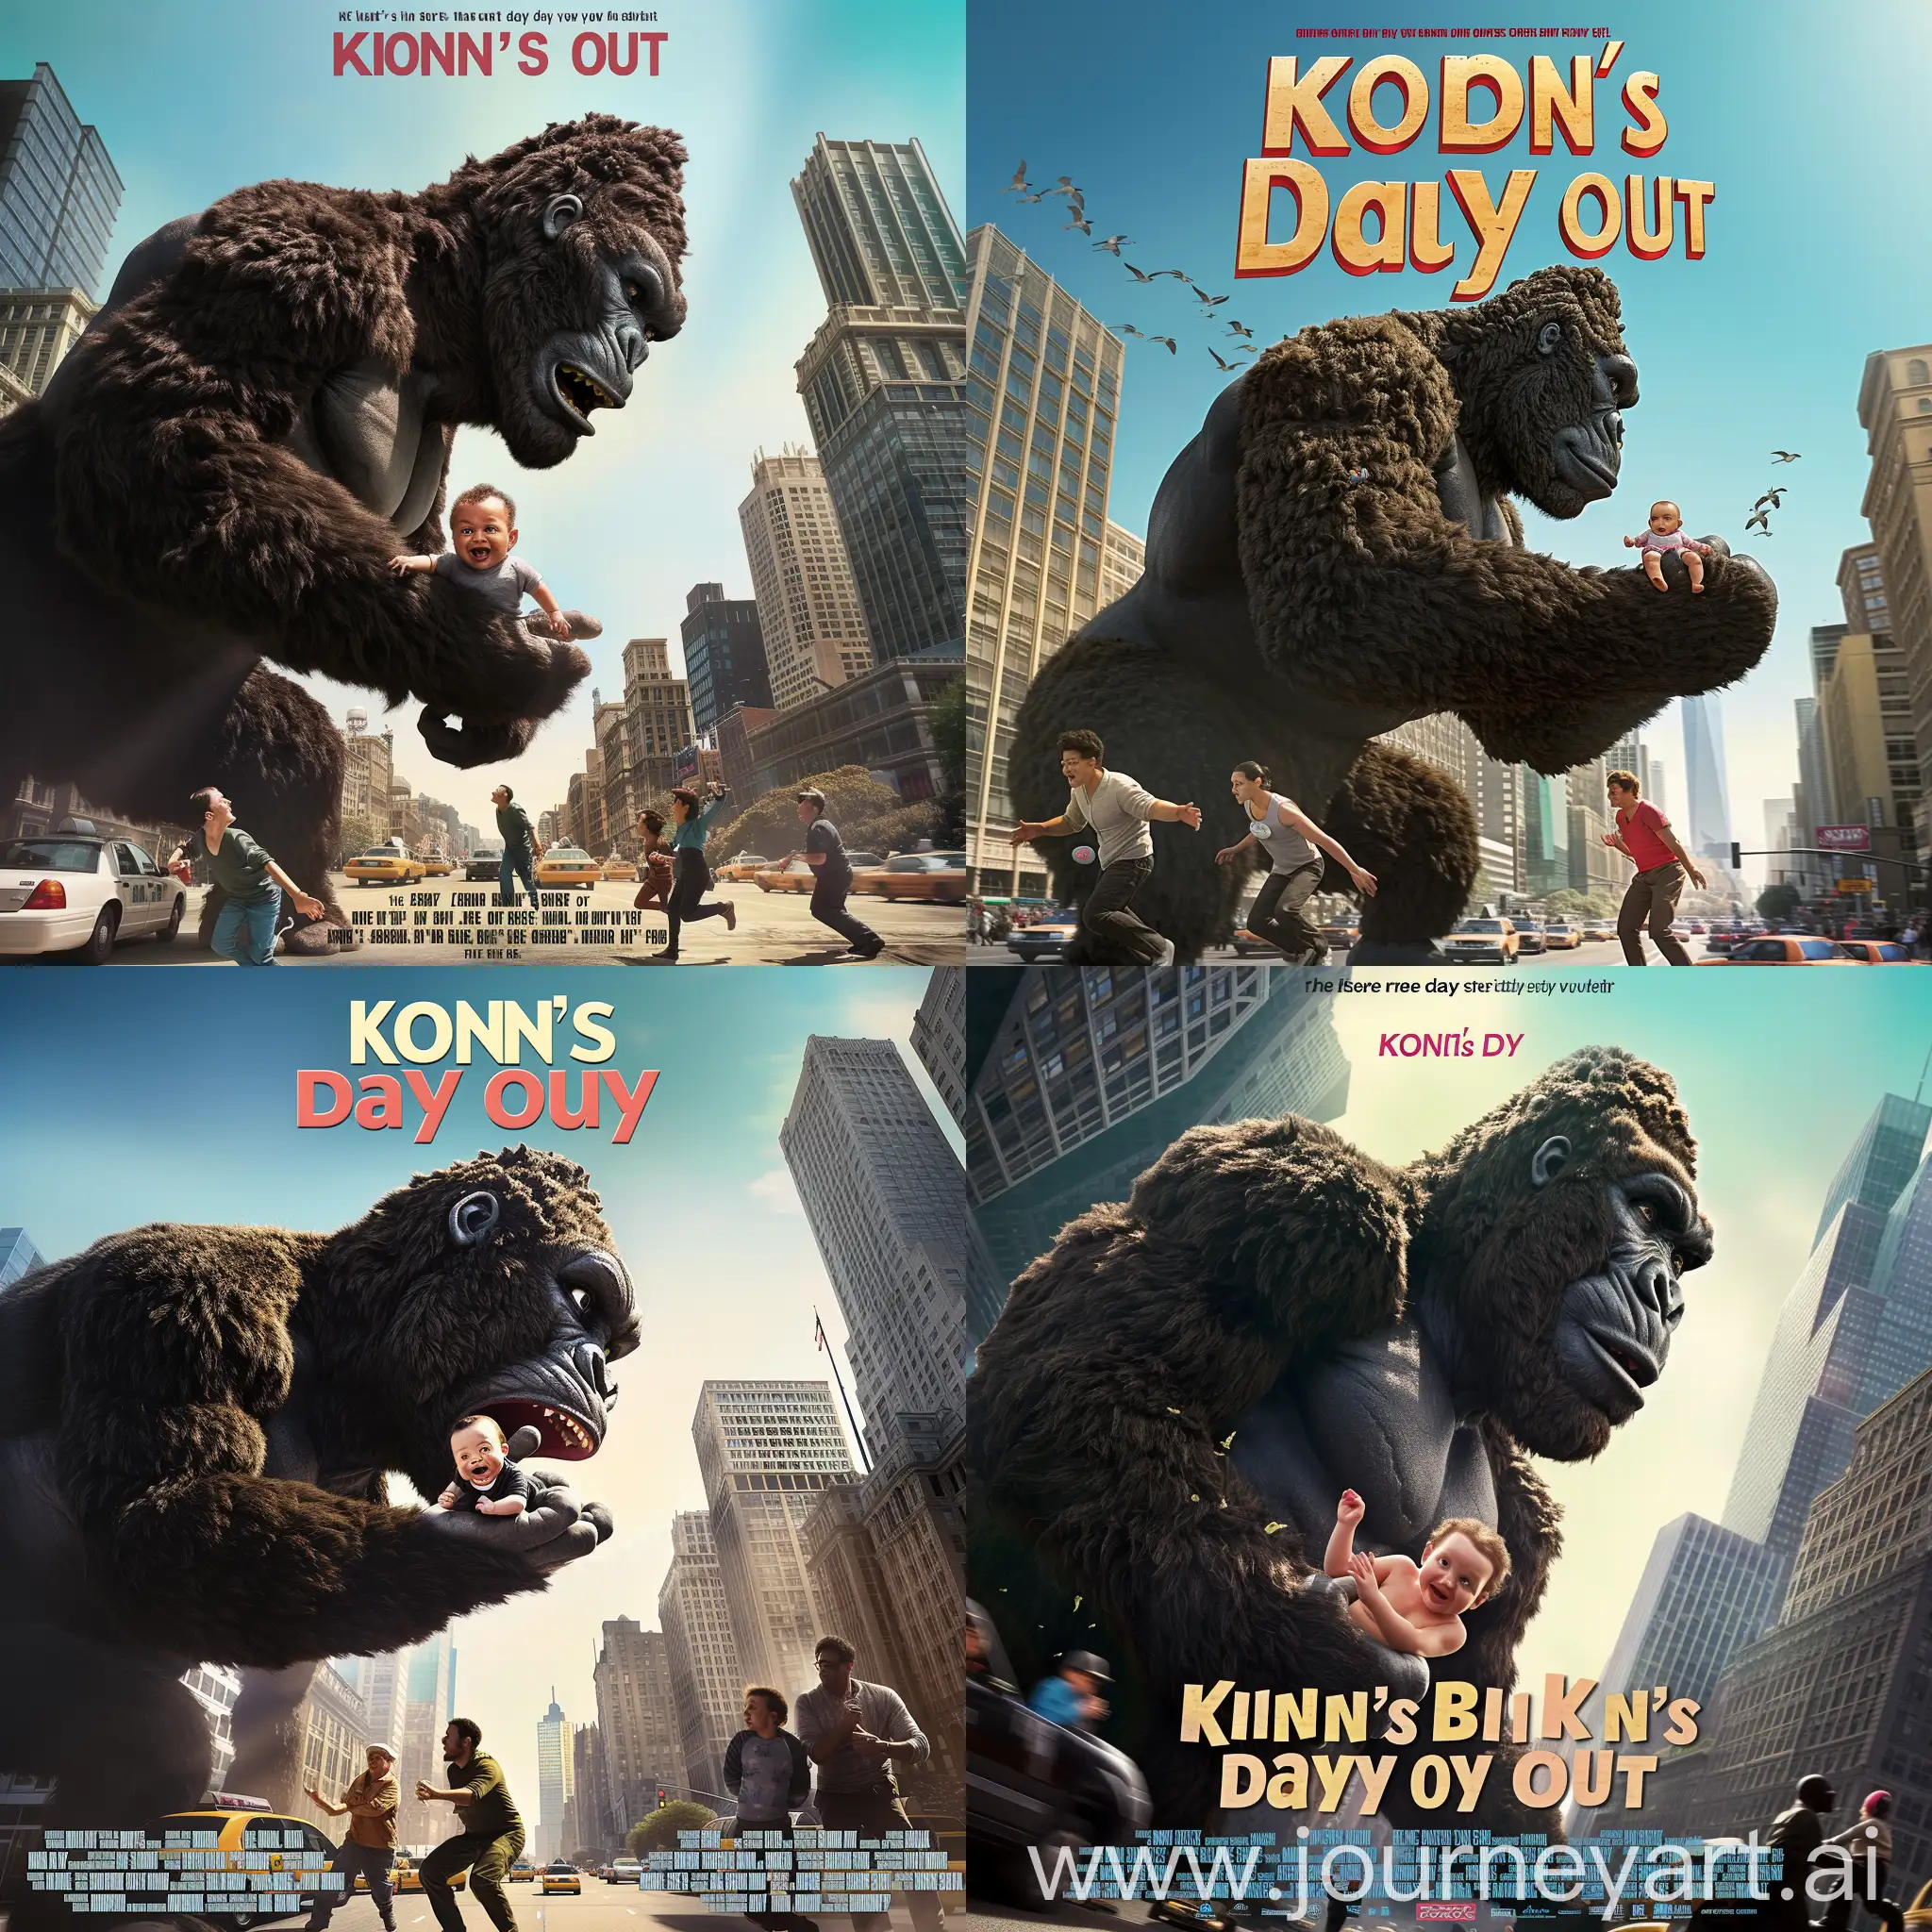 Imagine a thrilling movie poster for a crossover film titled "Kong's Day Out," where the iconic Kong becomes an unlikely hero in the comedic setting of "Baby's Day Out." The poster is vibrant and action-packed, featuring a colossal Kong in the heart of a bustling cityscape. His mighty form towers above the buildings, with one gentle, protective hand cradling the tiny, giggling Baby Bink.

The scene captures a moment of unexpected tenderness, as Kong, with a soft expression in his eyes, looks down at Baby Bink with a protective gaze. The background is a blur of urban chaos, with tiny cars and scattered pedestrians that emphasize the scale of Kong. Skyscrapers stretch towards a clear blue sky, creating a stark contrast against Kong's dark, rugged fur.

At the forefront, a comedic chase unfolds. Three bumbling kidnappers, identical to the original film's antagonists, are in a comedic pursuit, tripping over each other as they try to navigate the giant landscape created by Kong's presence. Their expressions are a mix of awe and fear, adding a humorous twist to their misfortune.

The title "Kong's Day Out" is boldly placed at the top of the poster in large, adventurous fonts, with a tagline beneath that reads: "The biggest babysitter you've ever seen!" The overall feel of the poster is a mix of awe-inspiring action and heartwarming comedy, promising a blockbuster experience where laughter and thrills go hand in hand.